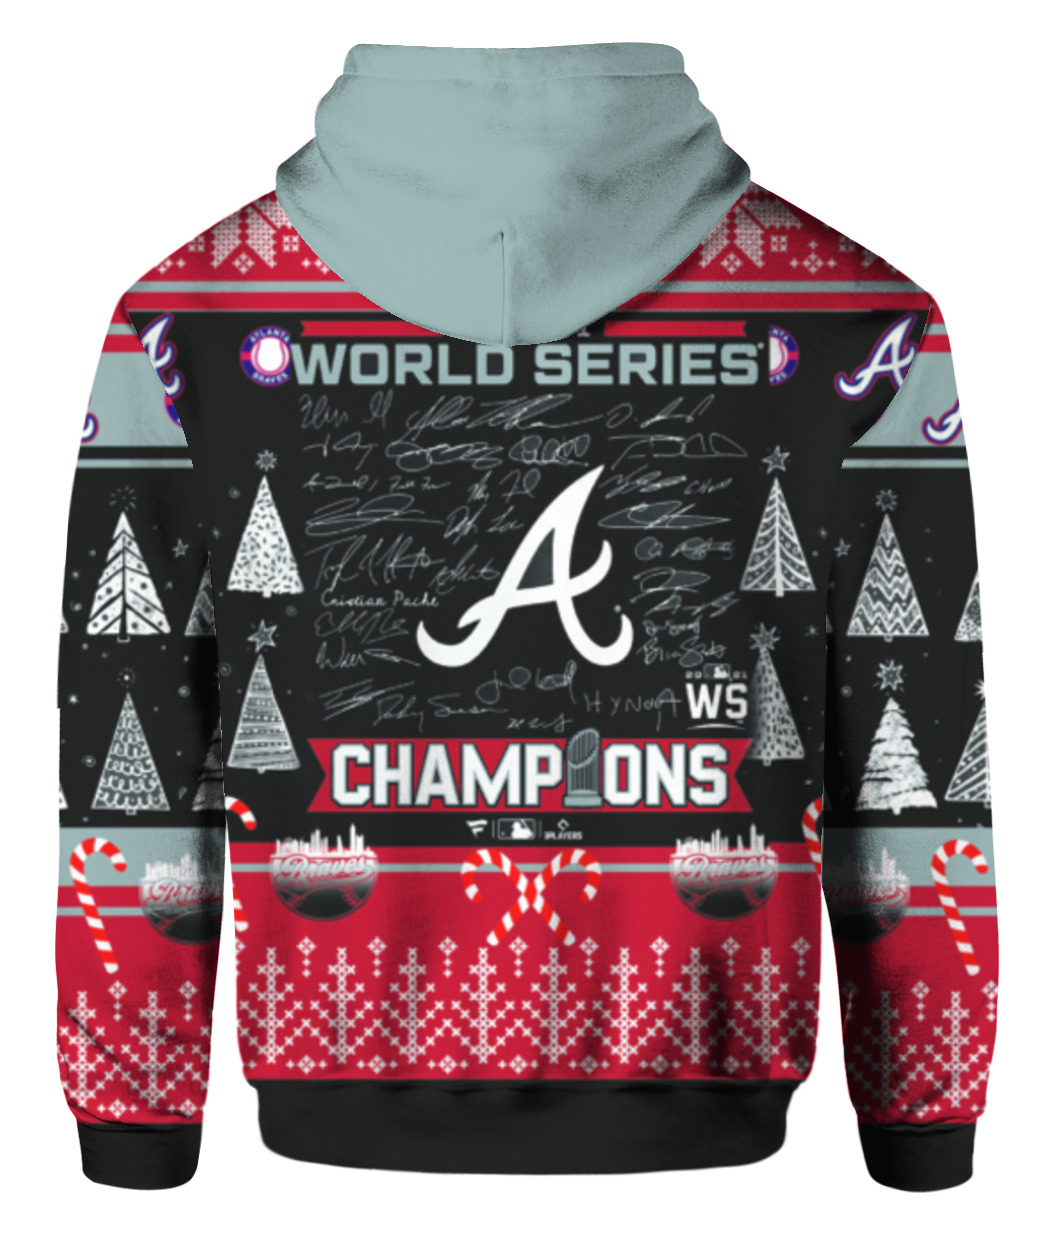 Atlanta Braves World Series Hoodie Design Color Options + All Sizes (S-5XL)